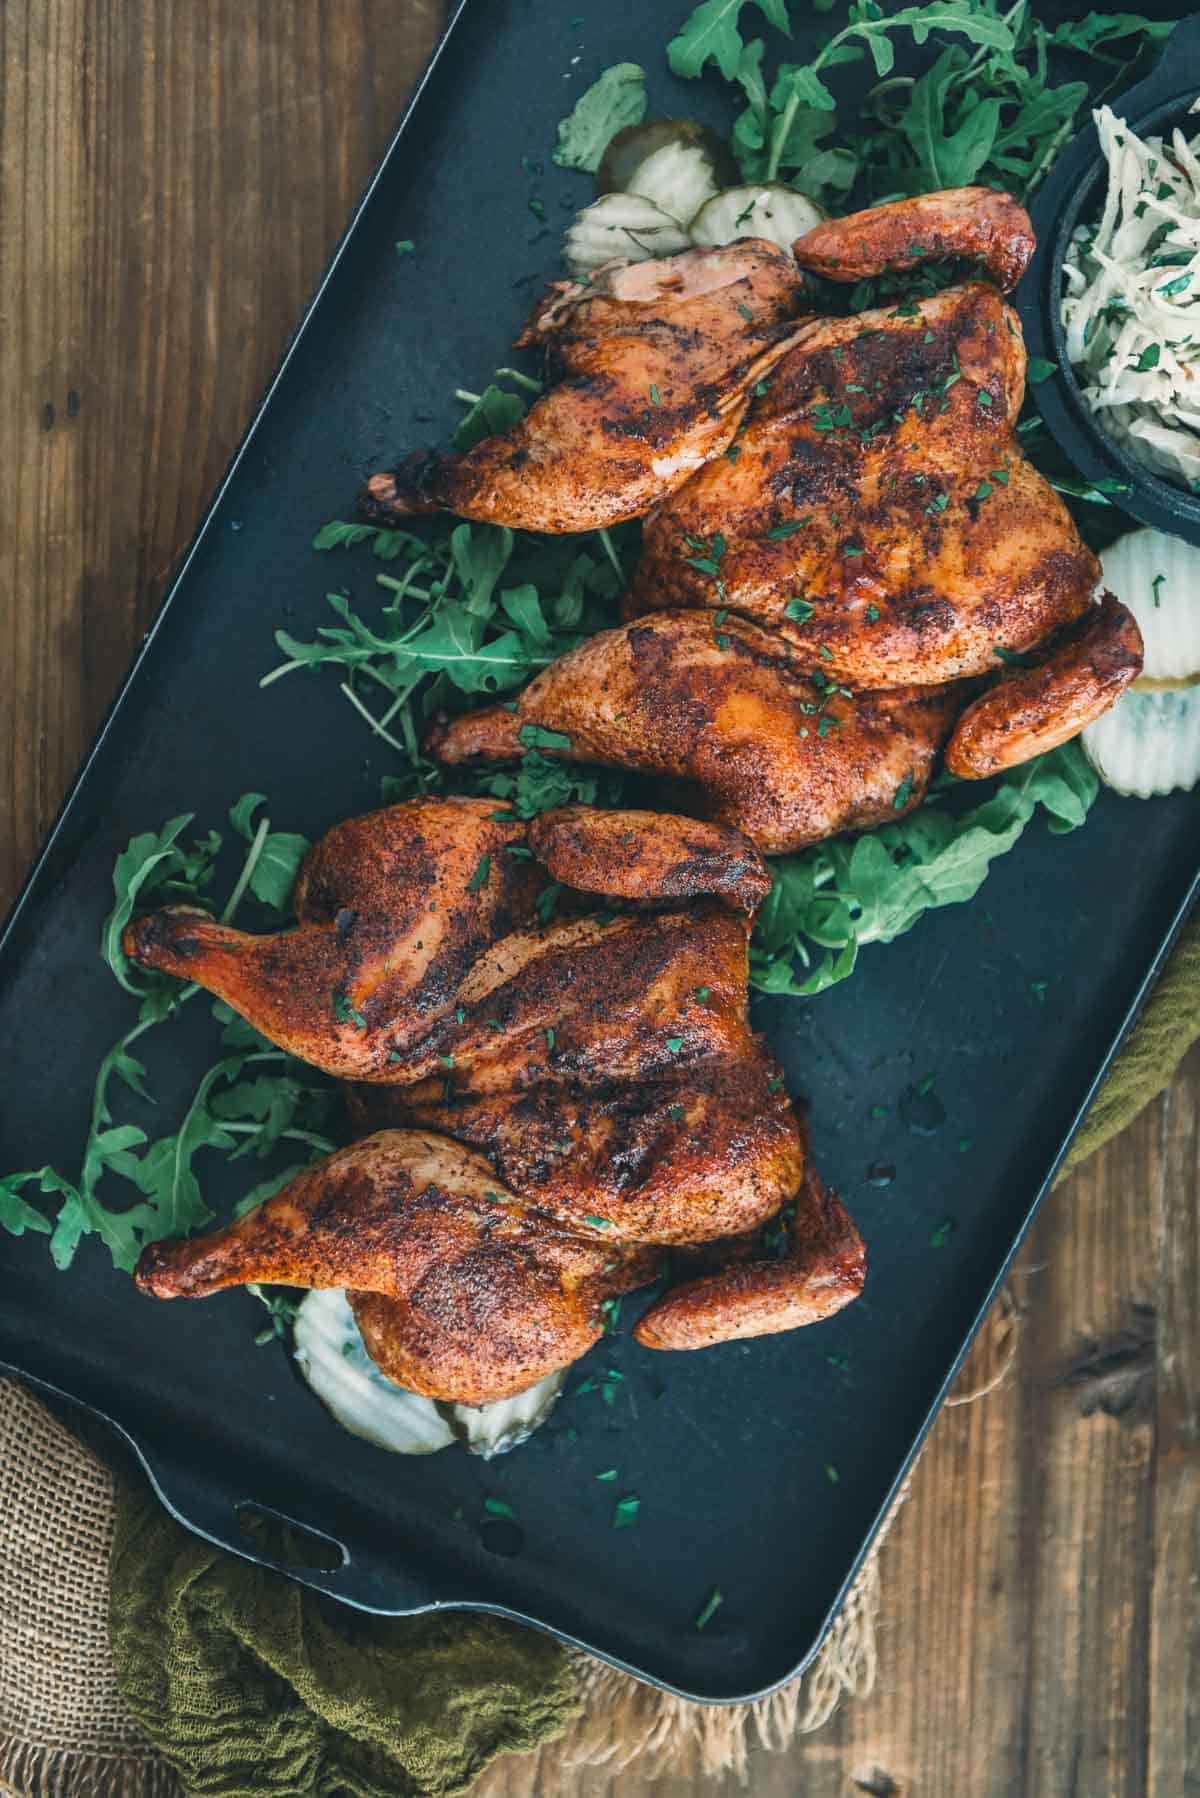 Smoked game hens on a black tray with greens.